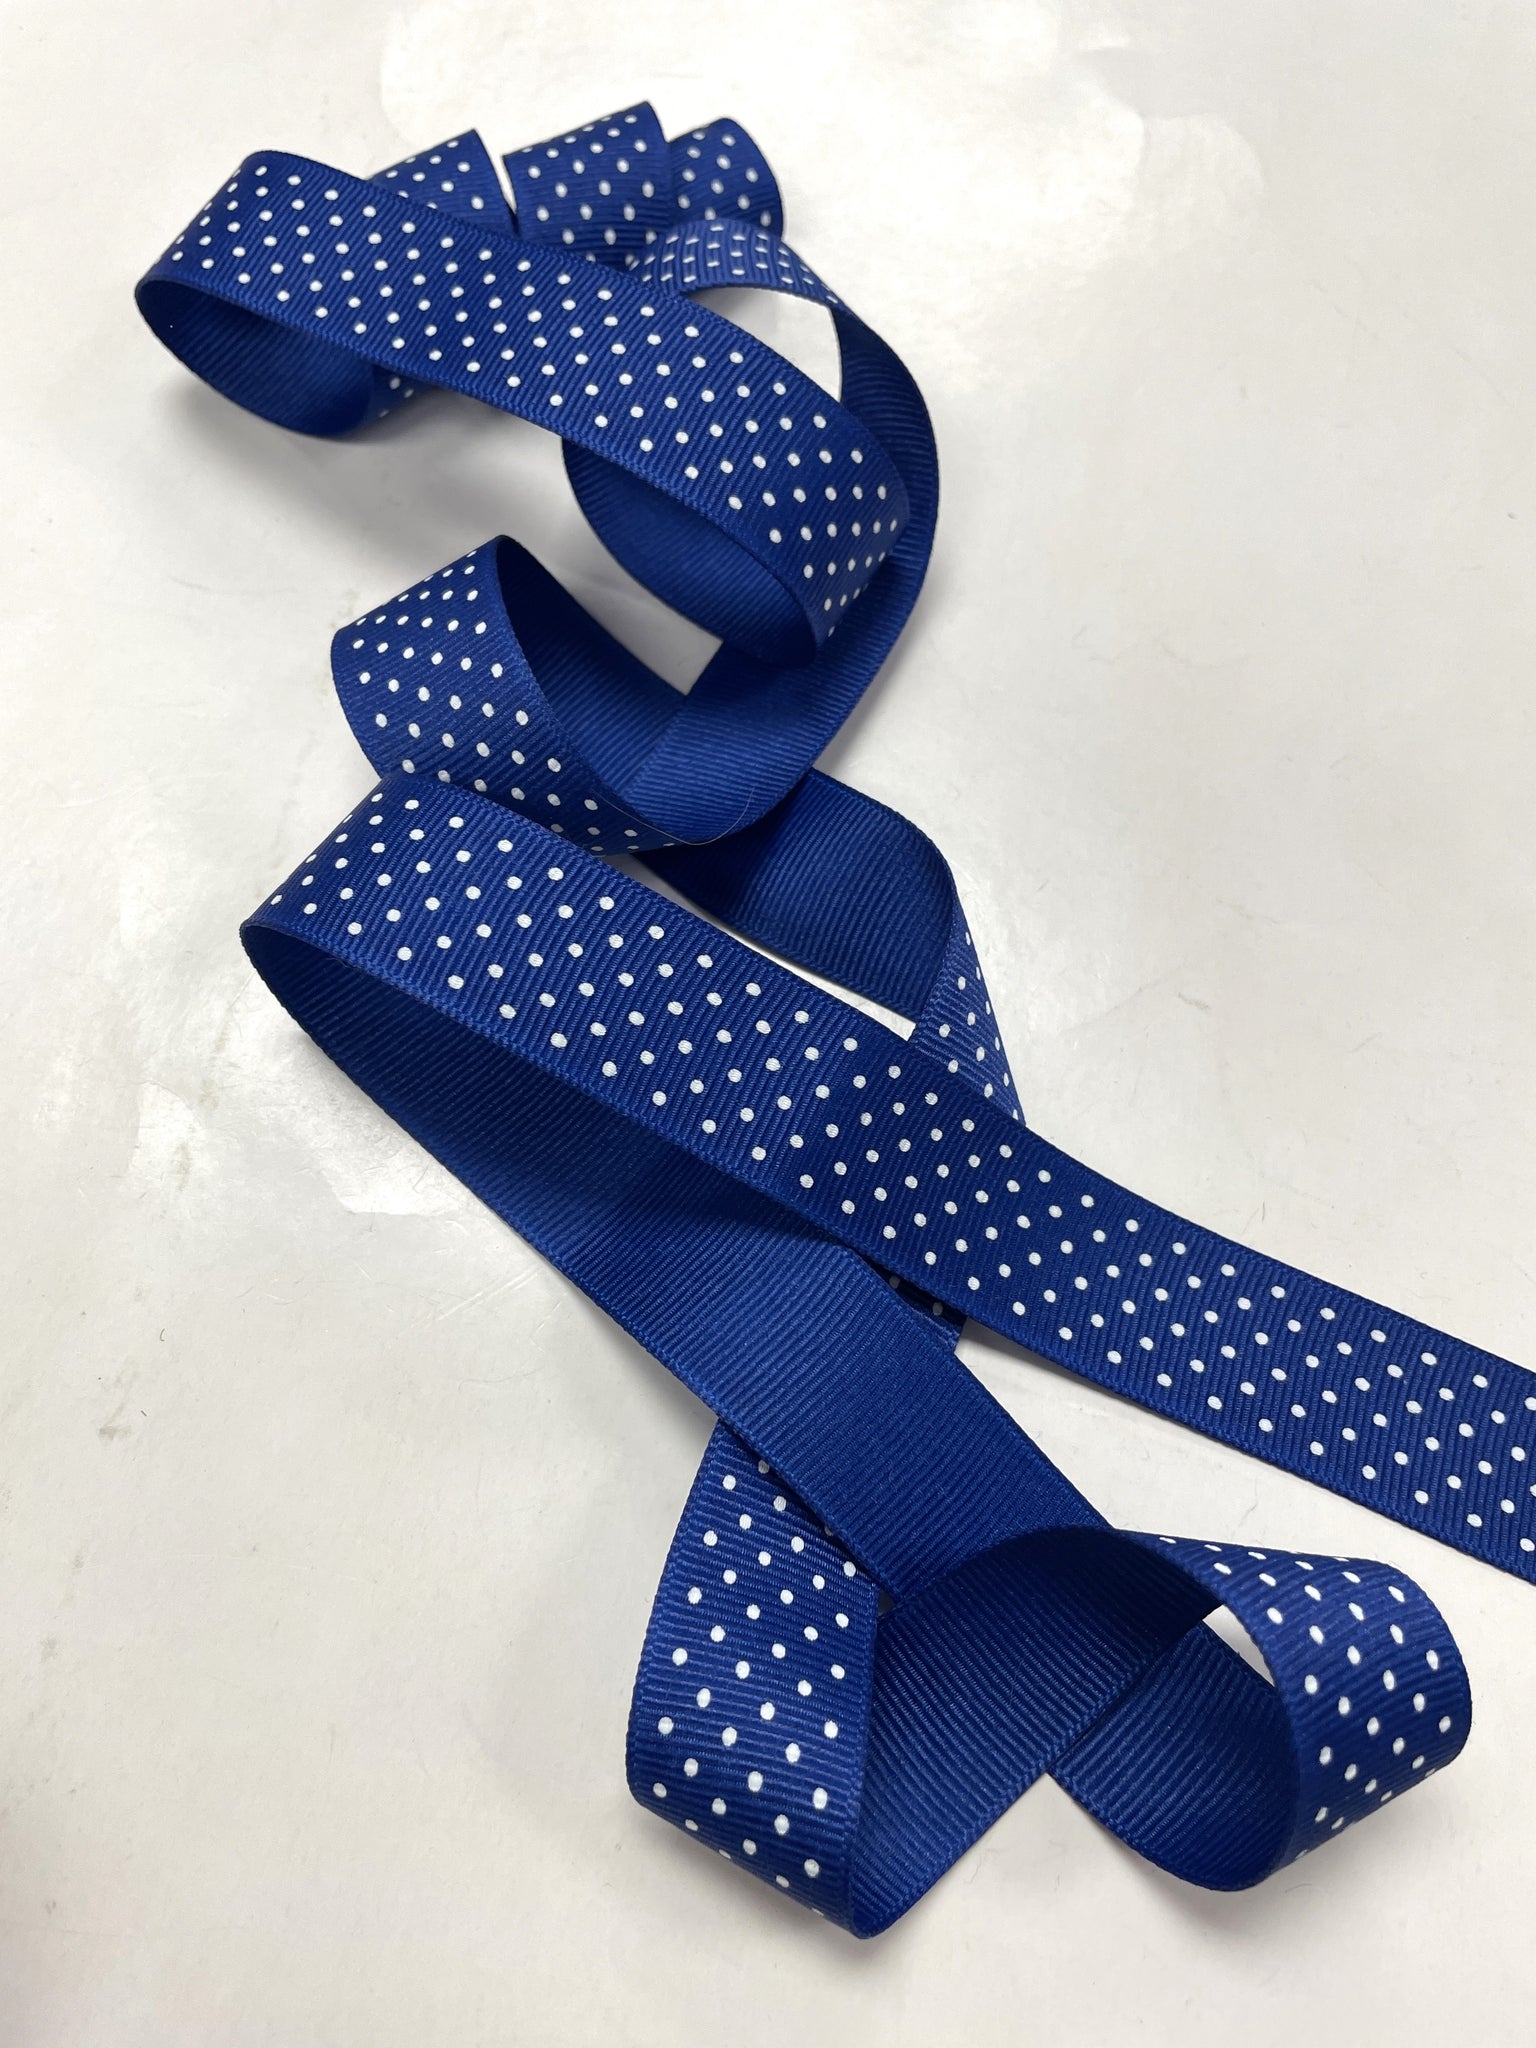 3 1/8 YD Polyester Grosgrain Ribbon - Blue with White Polka Dots